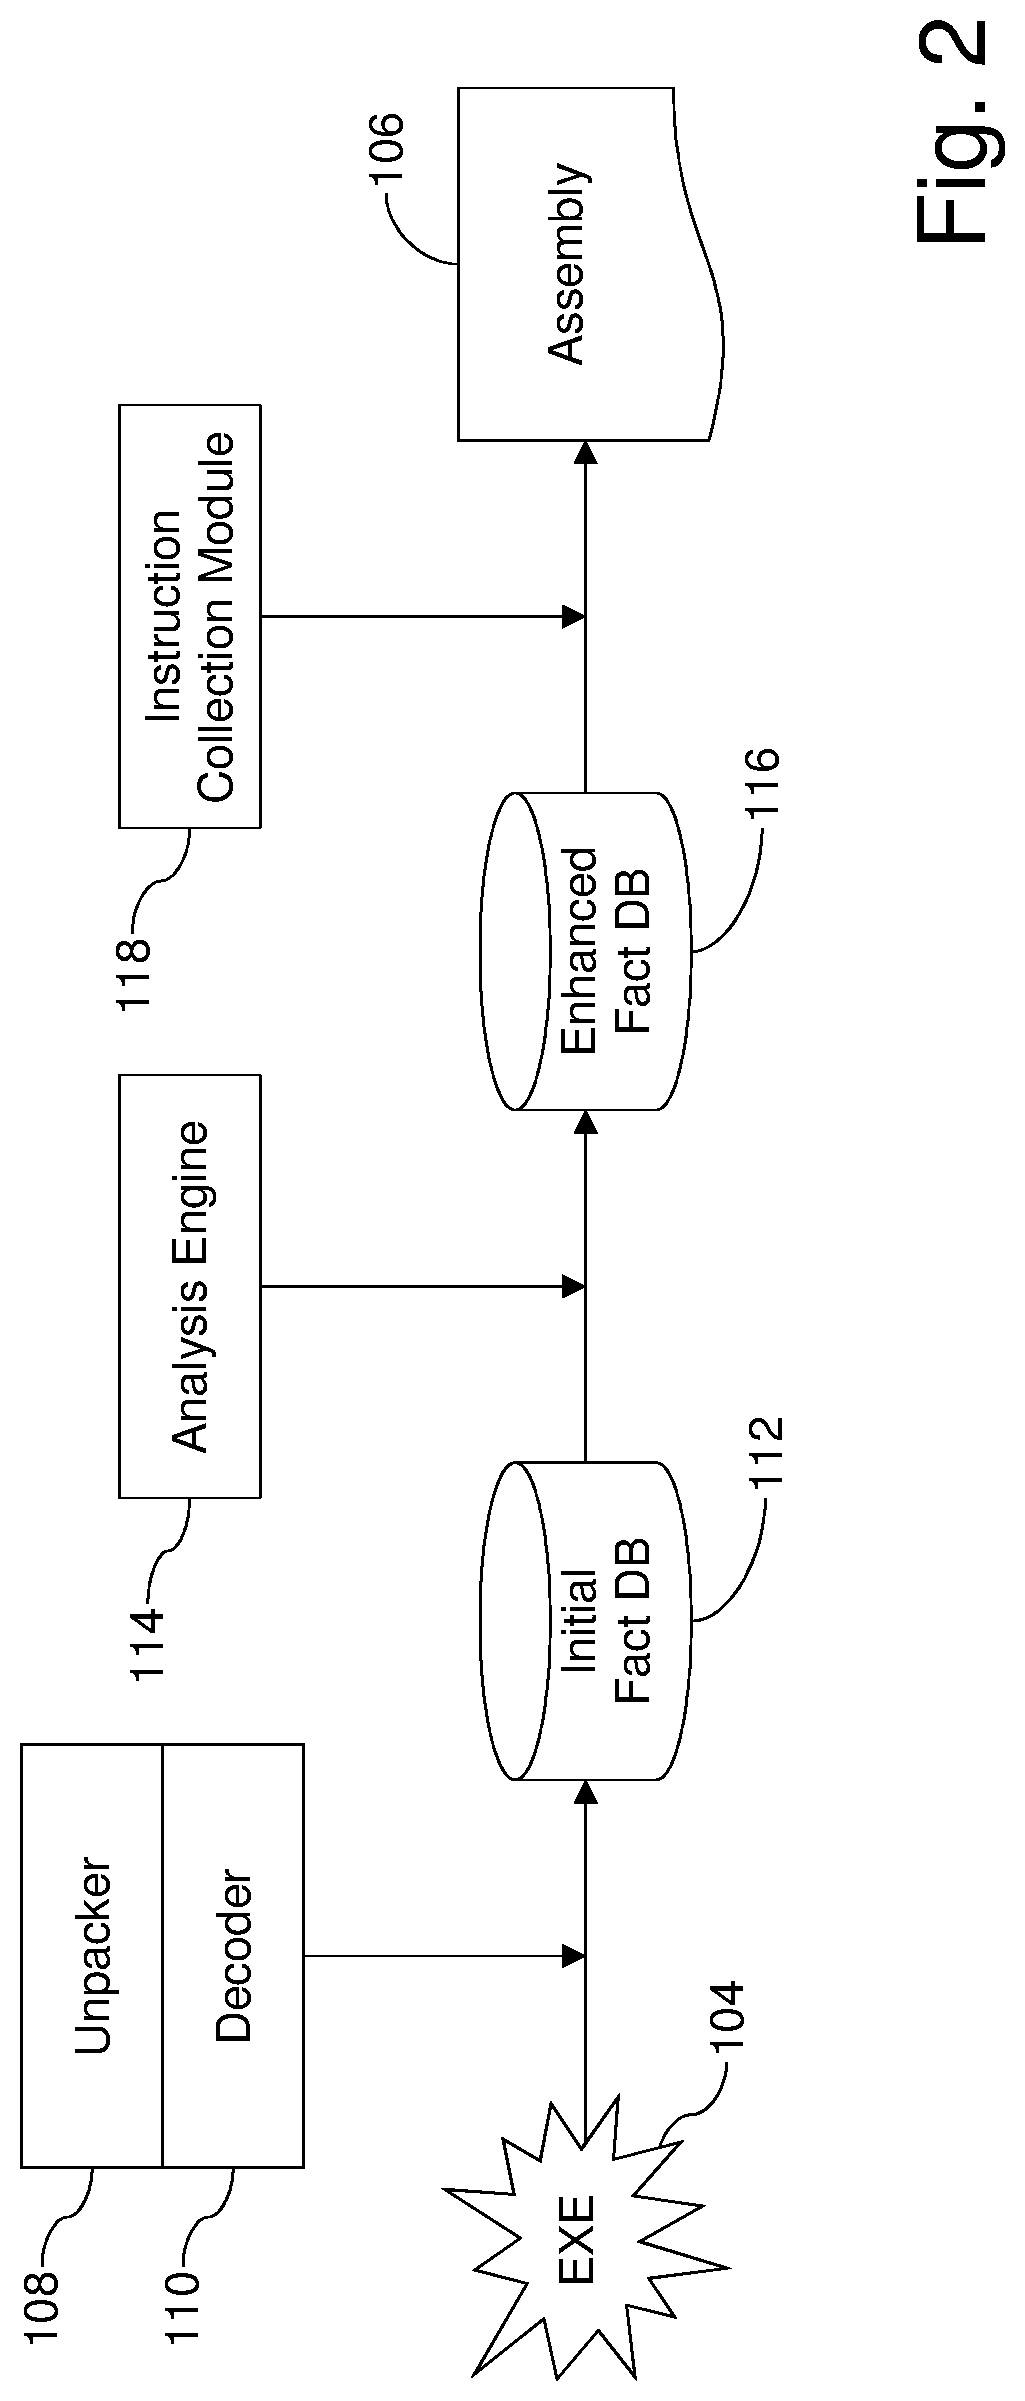 Systems and/or methods for generating reassemblable disassemblies of binaries using declarative logic